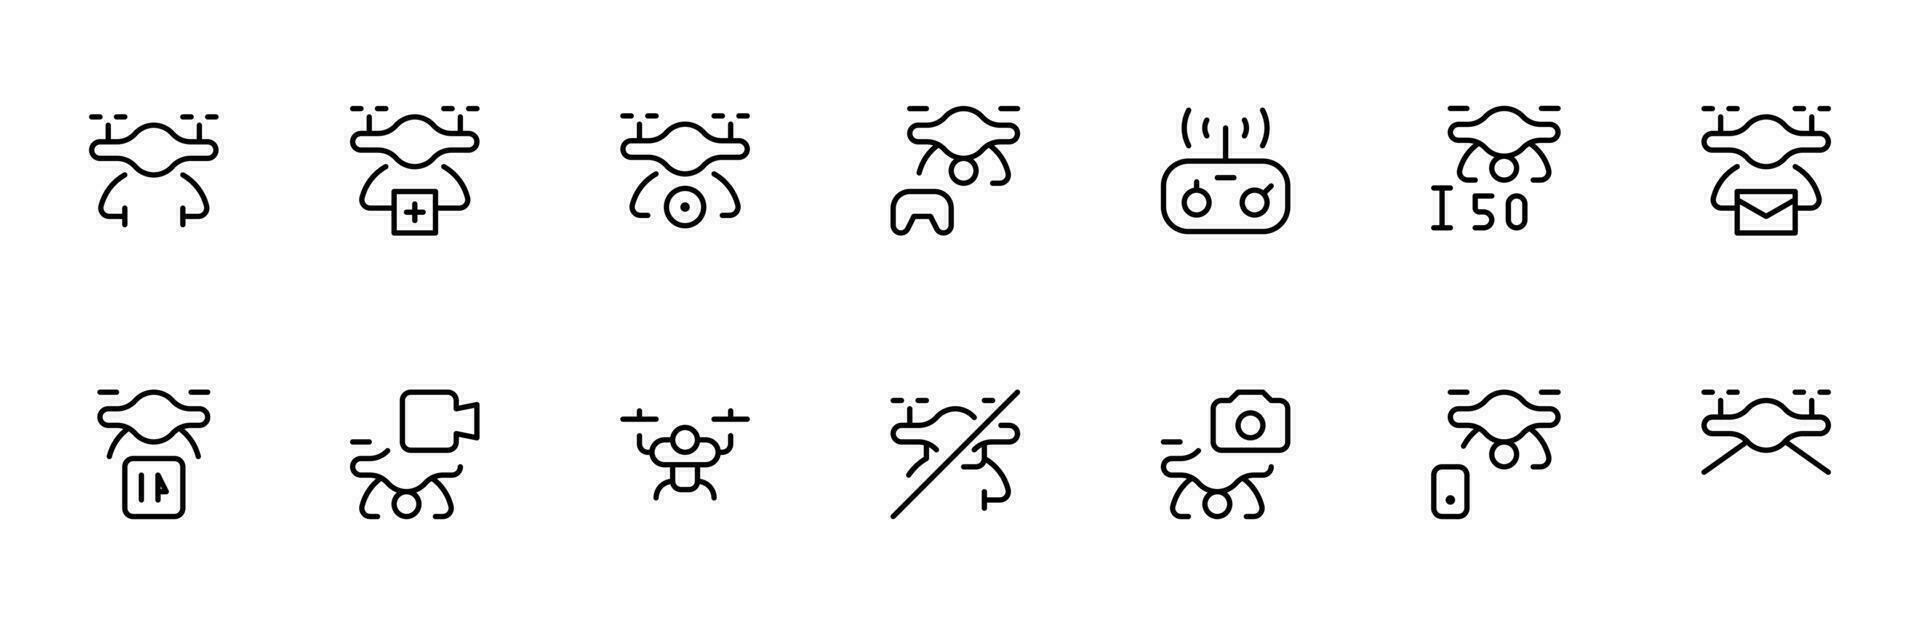 Drone Logo, drone remote logo, Template Drone icons set. Logos templates of flying drones, outline Drone Photo Logo Design Template, drone logo vector simple design, drone logo template vector icon.